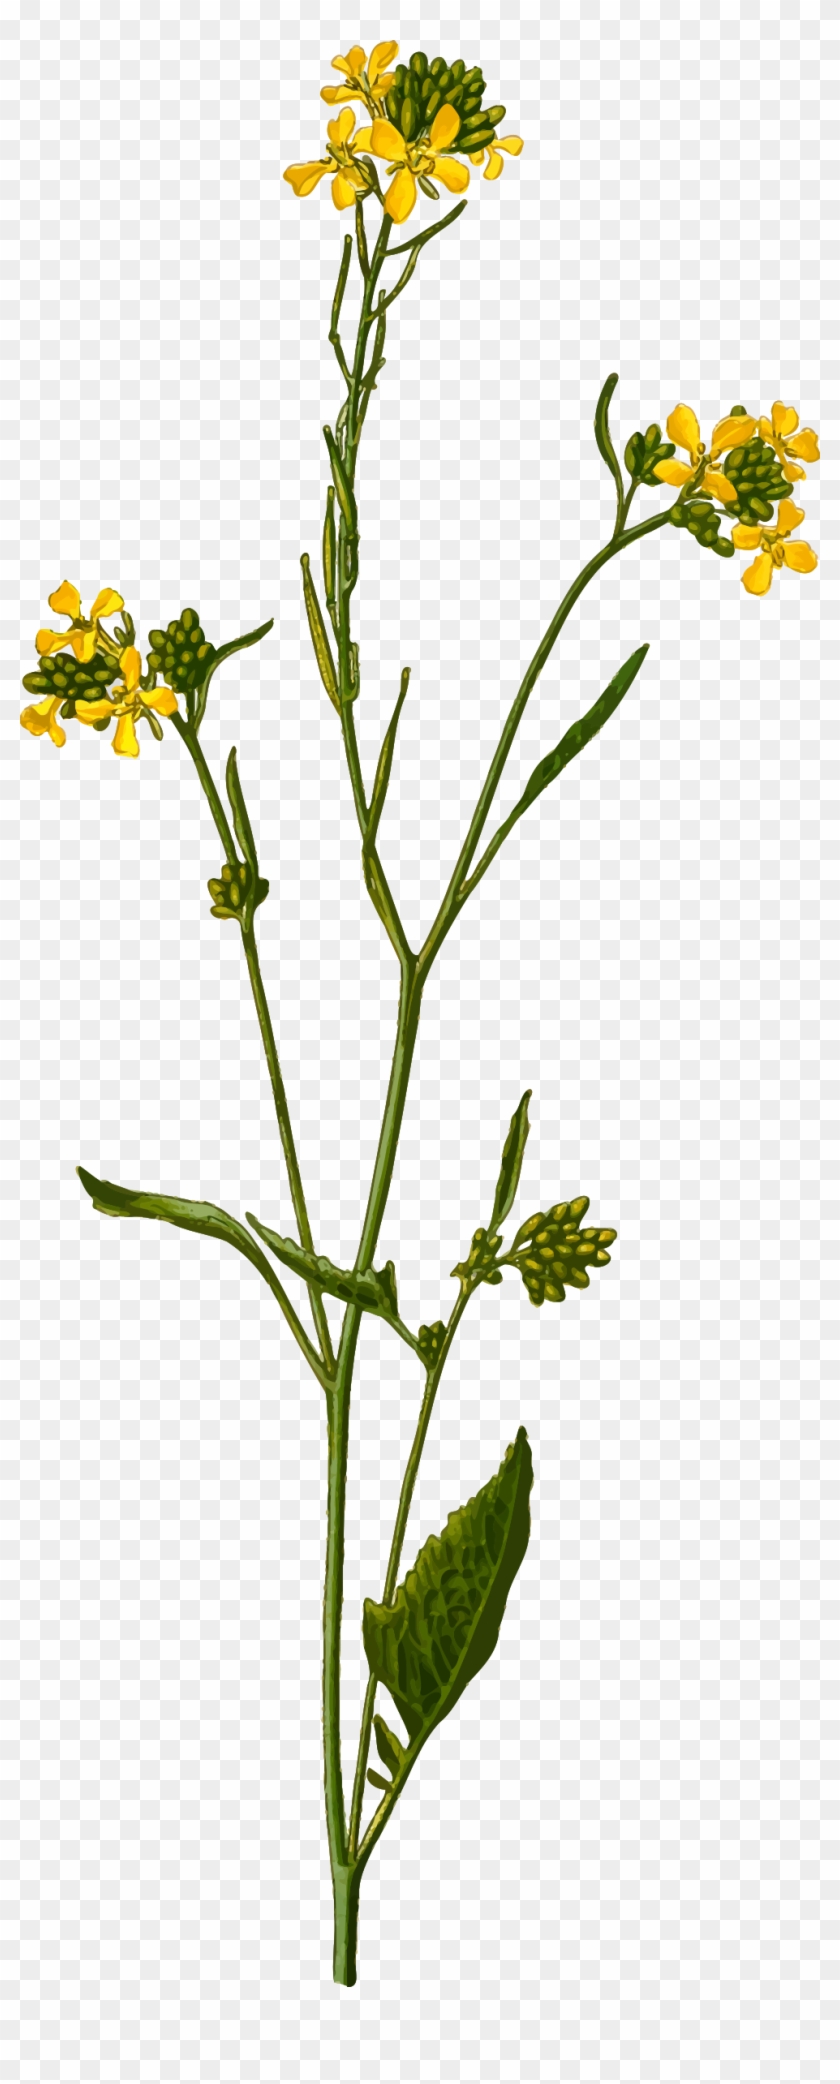 Black Mustard By @firkin, From A Drawing In 'medizinal-pflanzen', - Mustard Seed Plant Drawing #176147